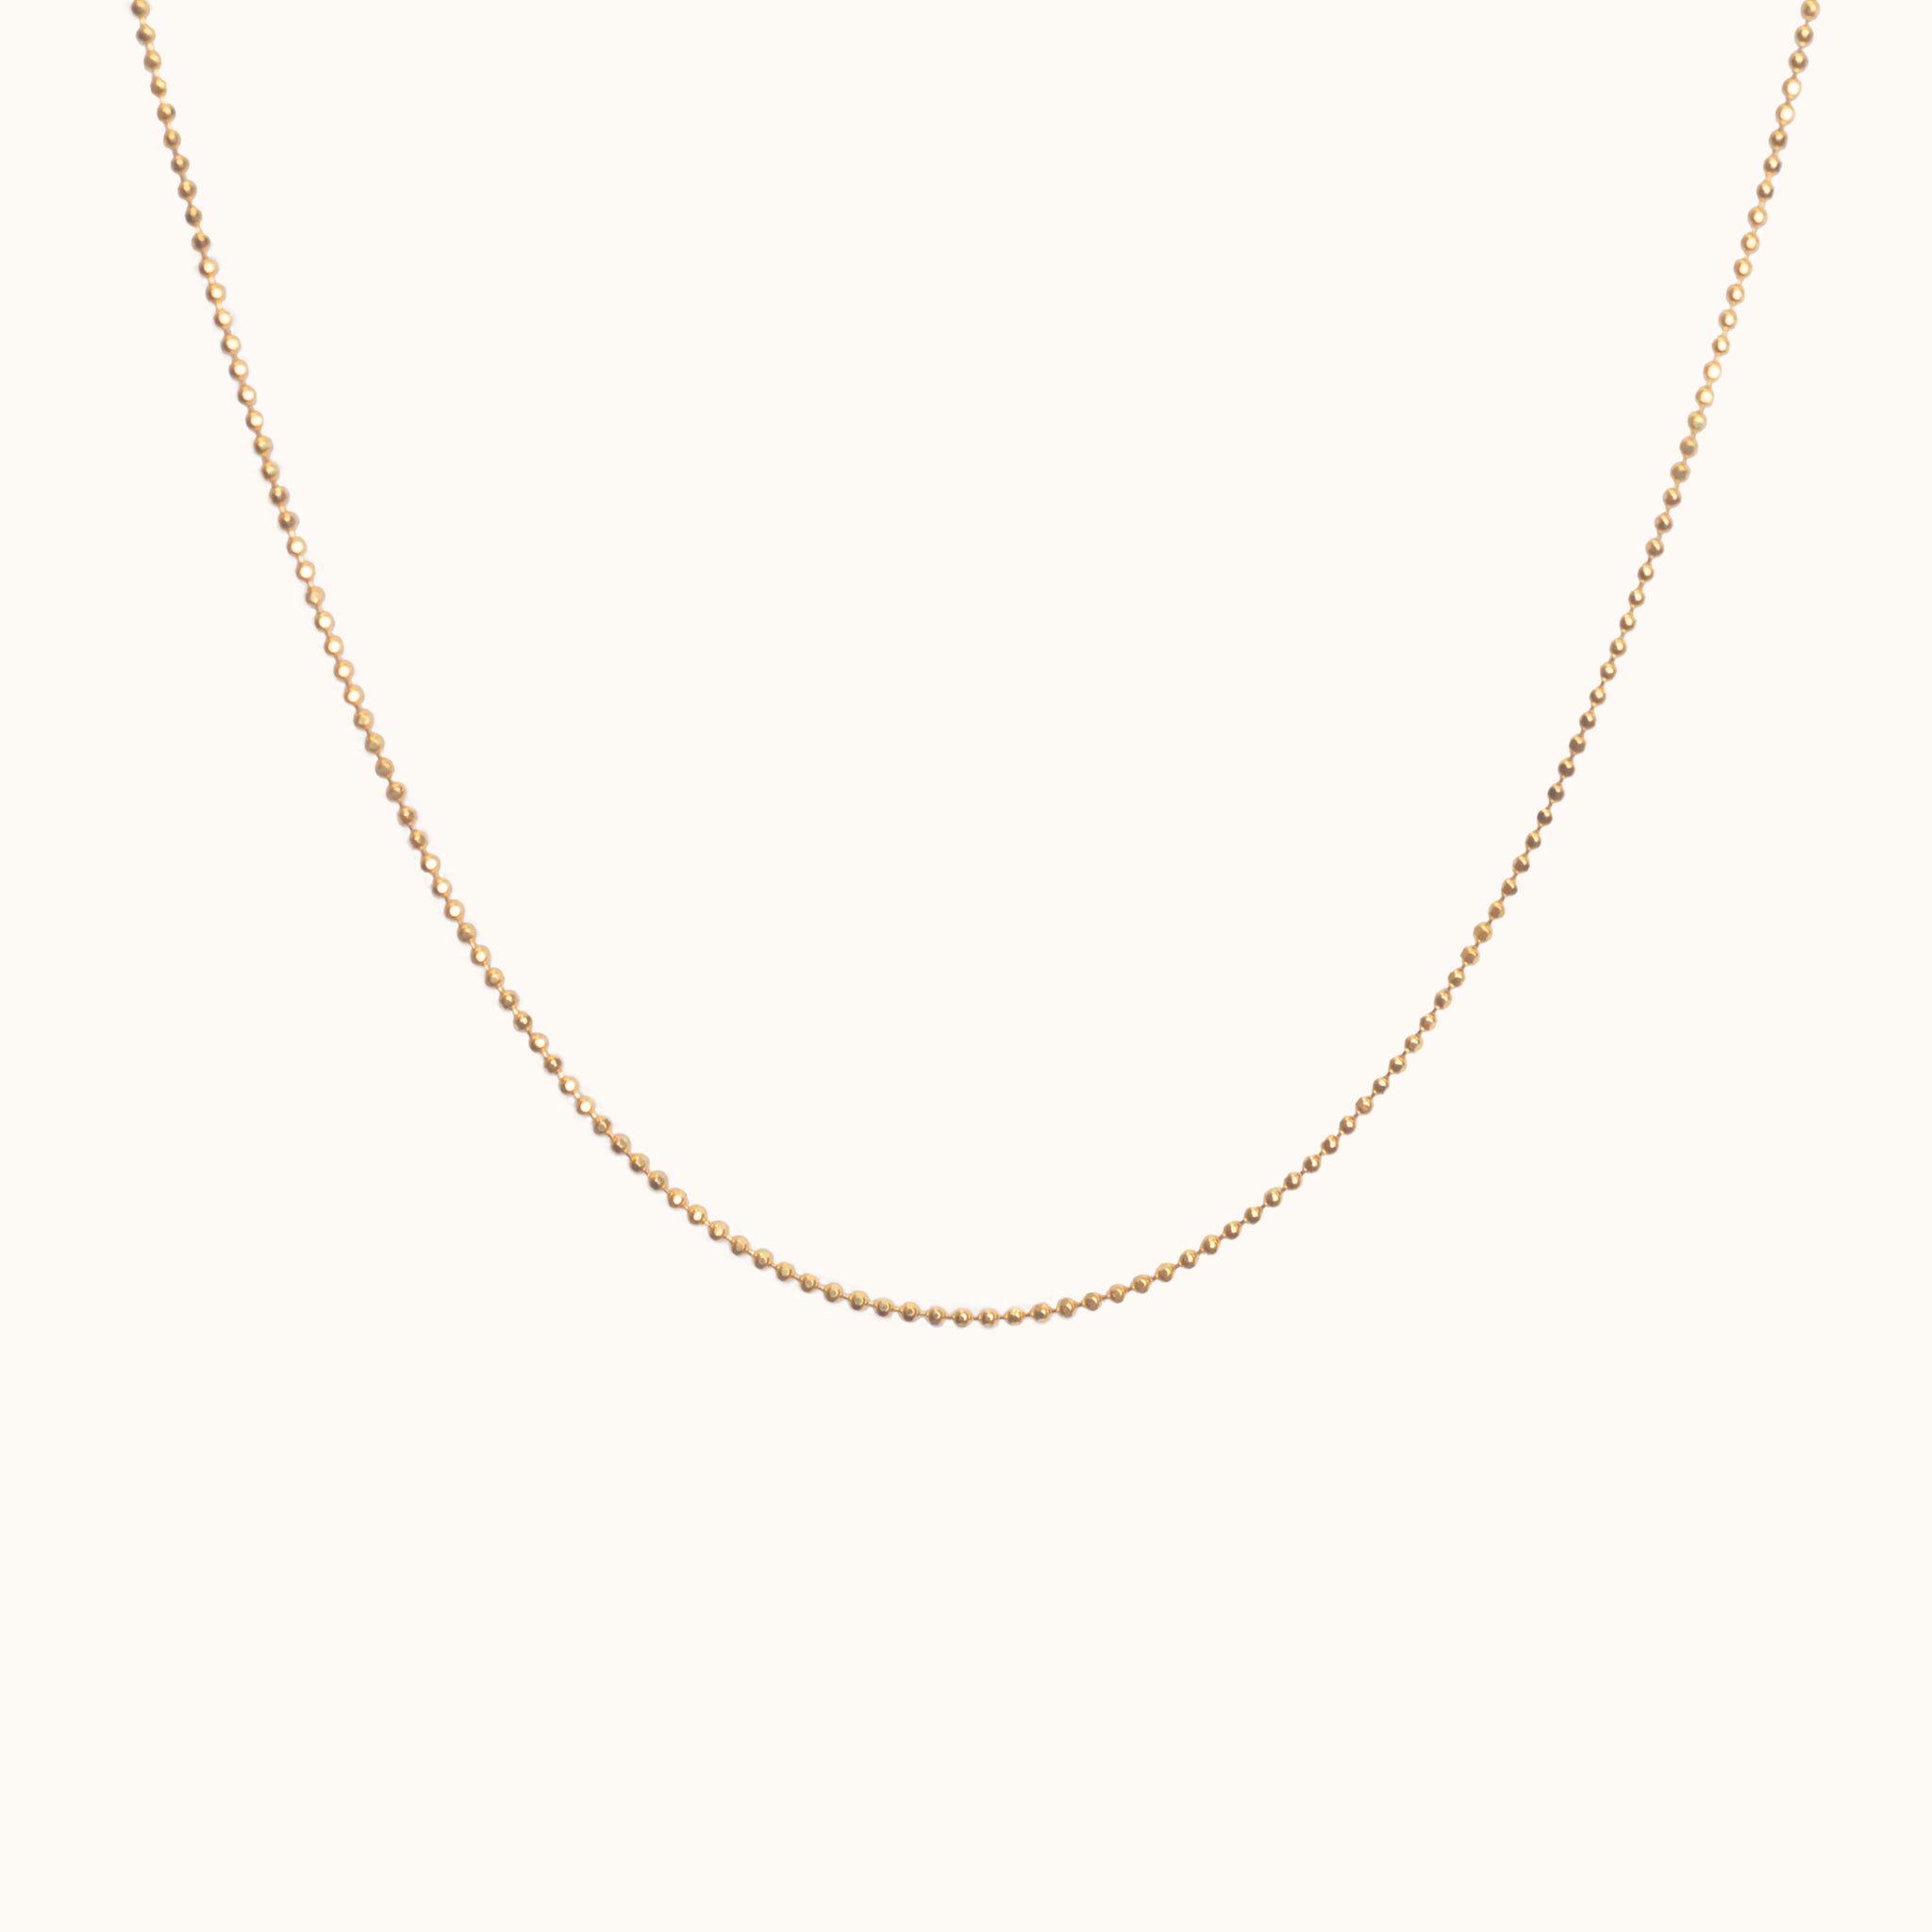 14K Solid Gold Diamond Cut Hammered Disco Ball Bead Chain Necklace by Doviana